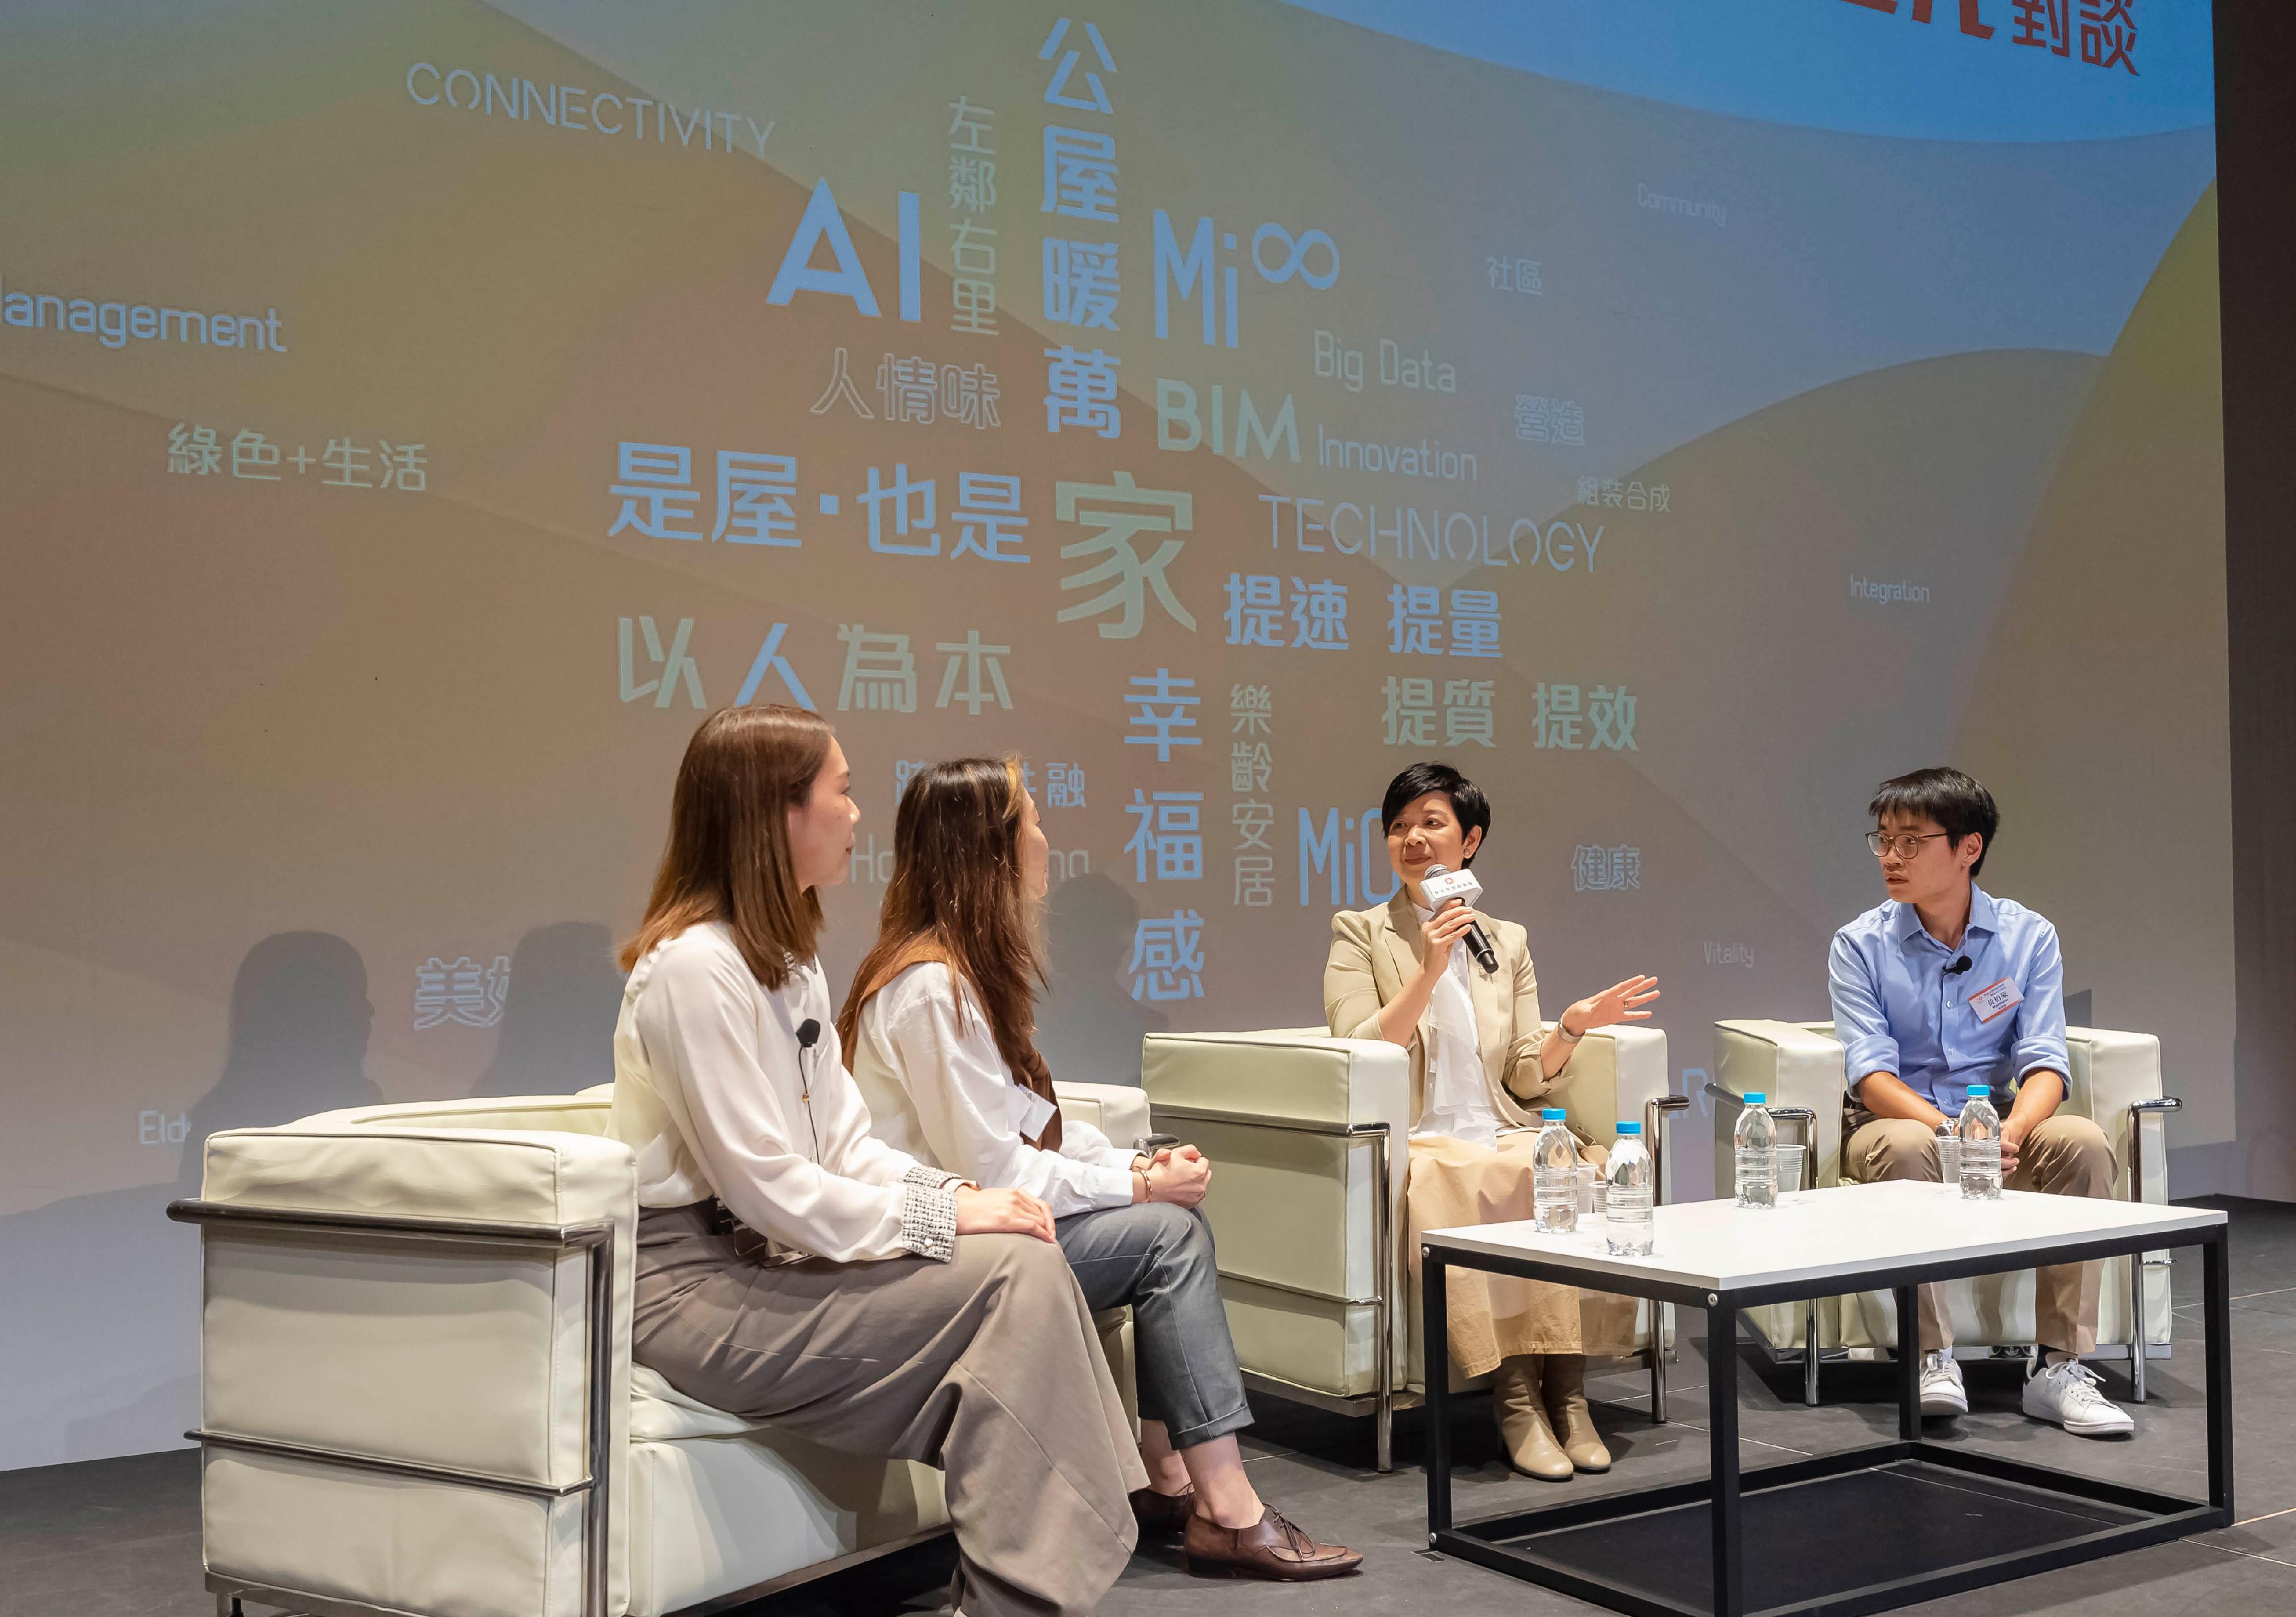 The Secretary for Housing, Ms Winnie Ho (second right), engaged young professionals to explore the future development of public housing at a forum titled "Evolution of Public Housing in Hong Kong - Dialogue with the New Generation" organised by the Hong Kong Housing Authority.